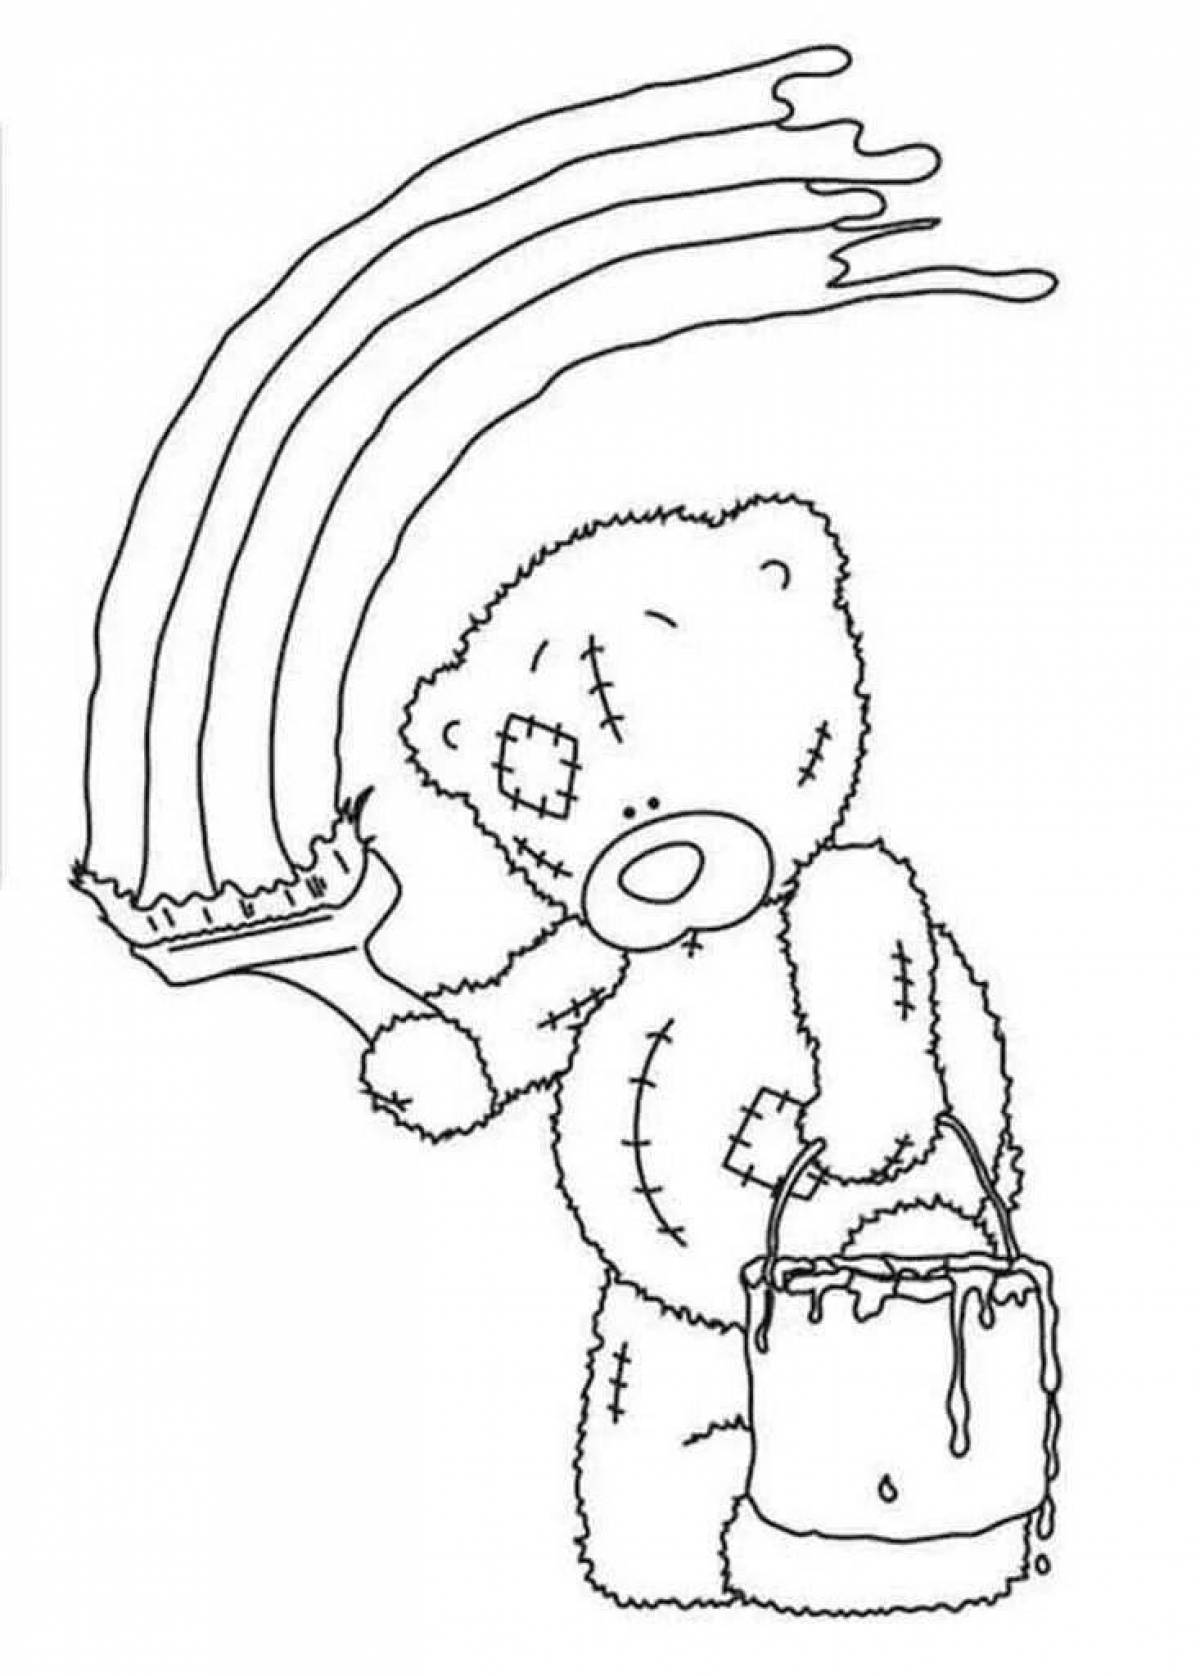 Colorful teddy coloring page